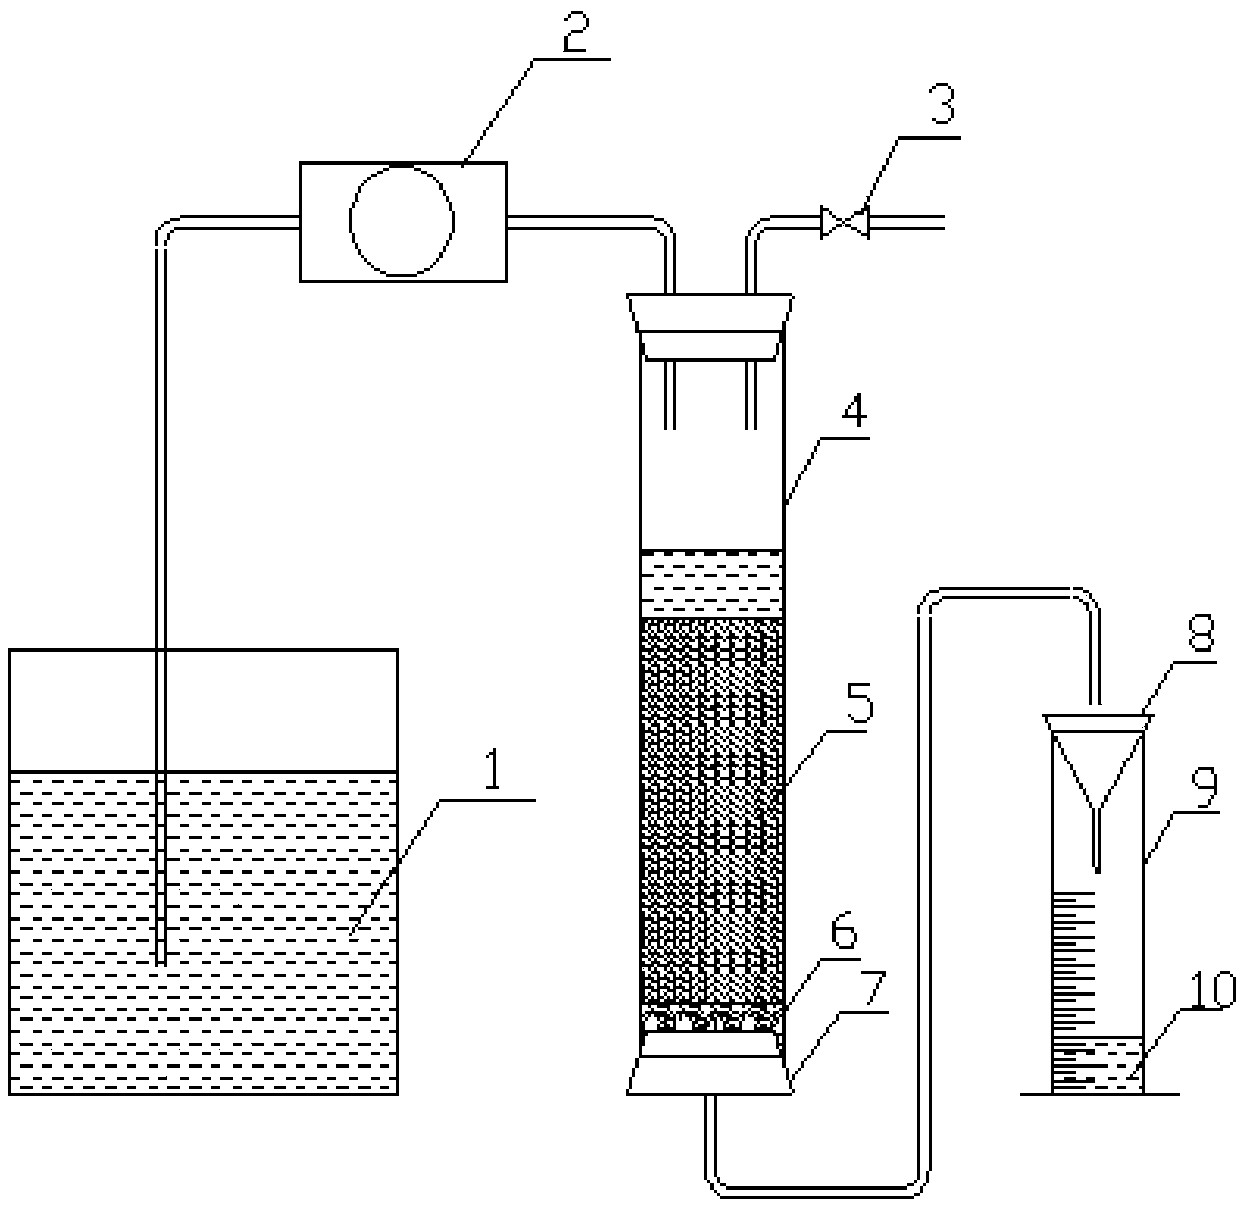 Using method of recovery adsorption tower in in-situ leaching mining uranium water treatment technology